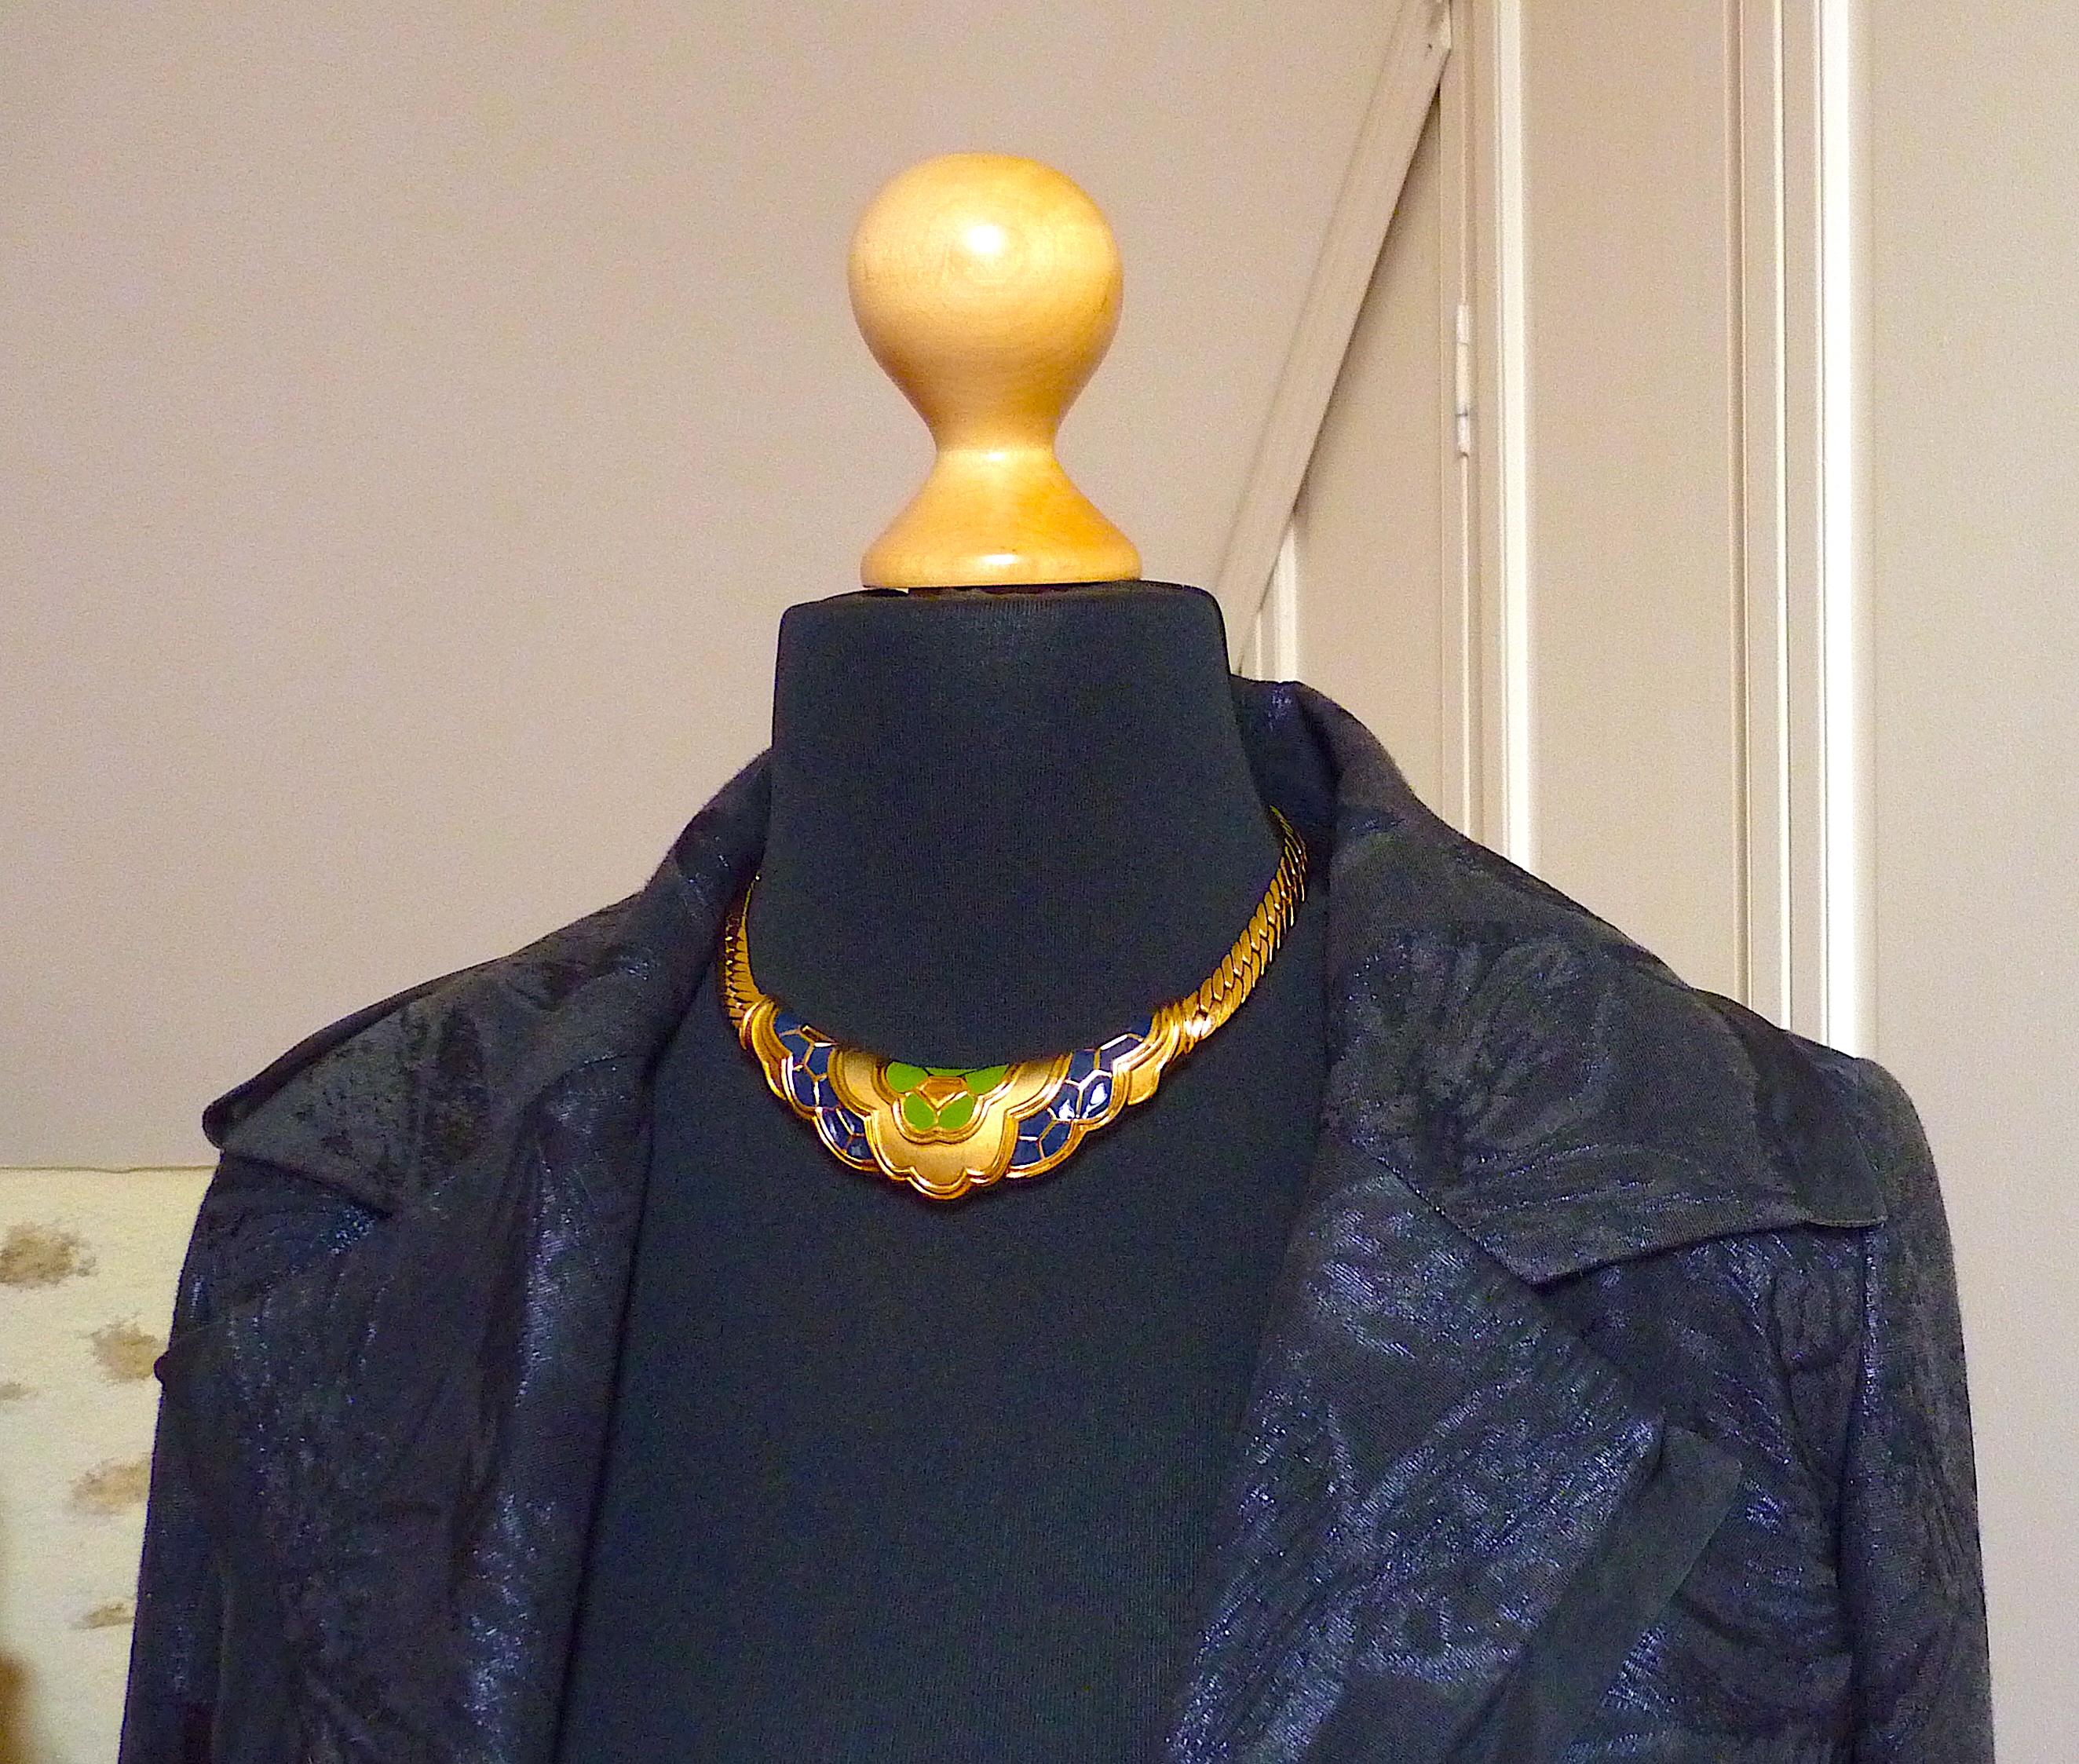 Exquisite LANVIN Choker Necklace, Green and Deep Blue Enameled Metal and Gold Tone Metal Snake Chain, Vintage from the 70s
Signed Lanvin Germany at back, with a Lanvin Logo Metal Tag near the clasp

CONDITION : Excellent Vintage Condition !

An